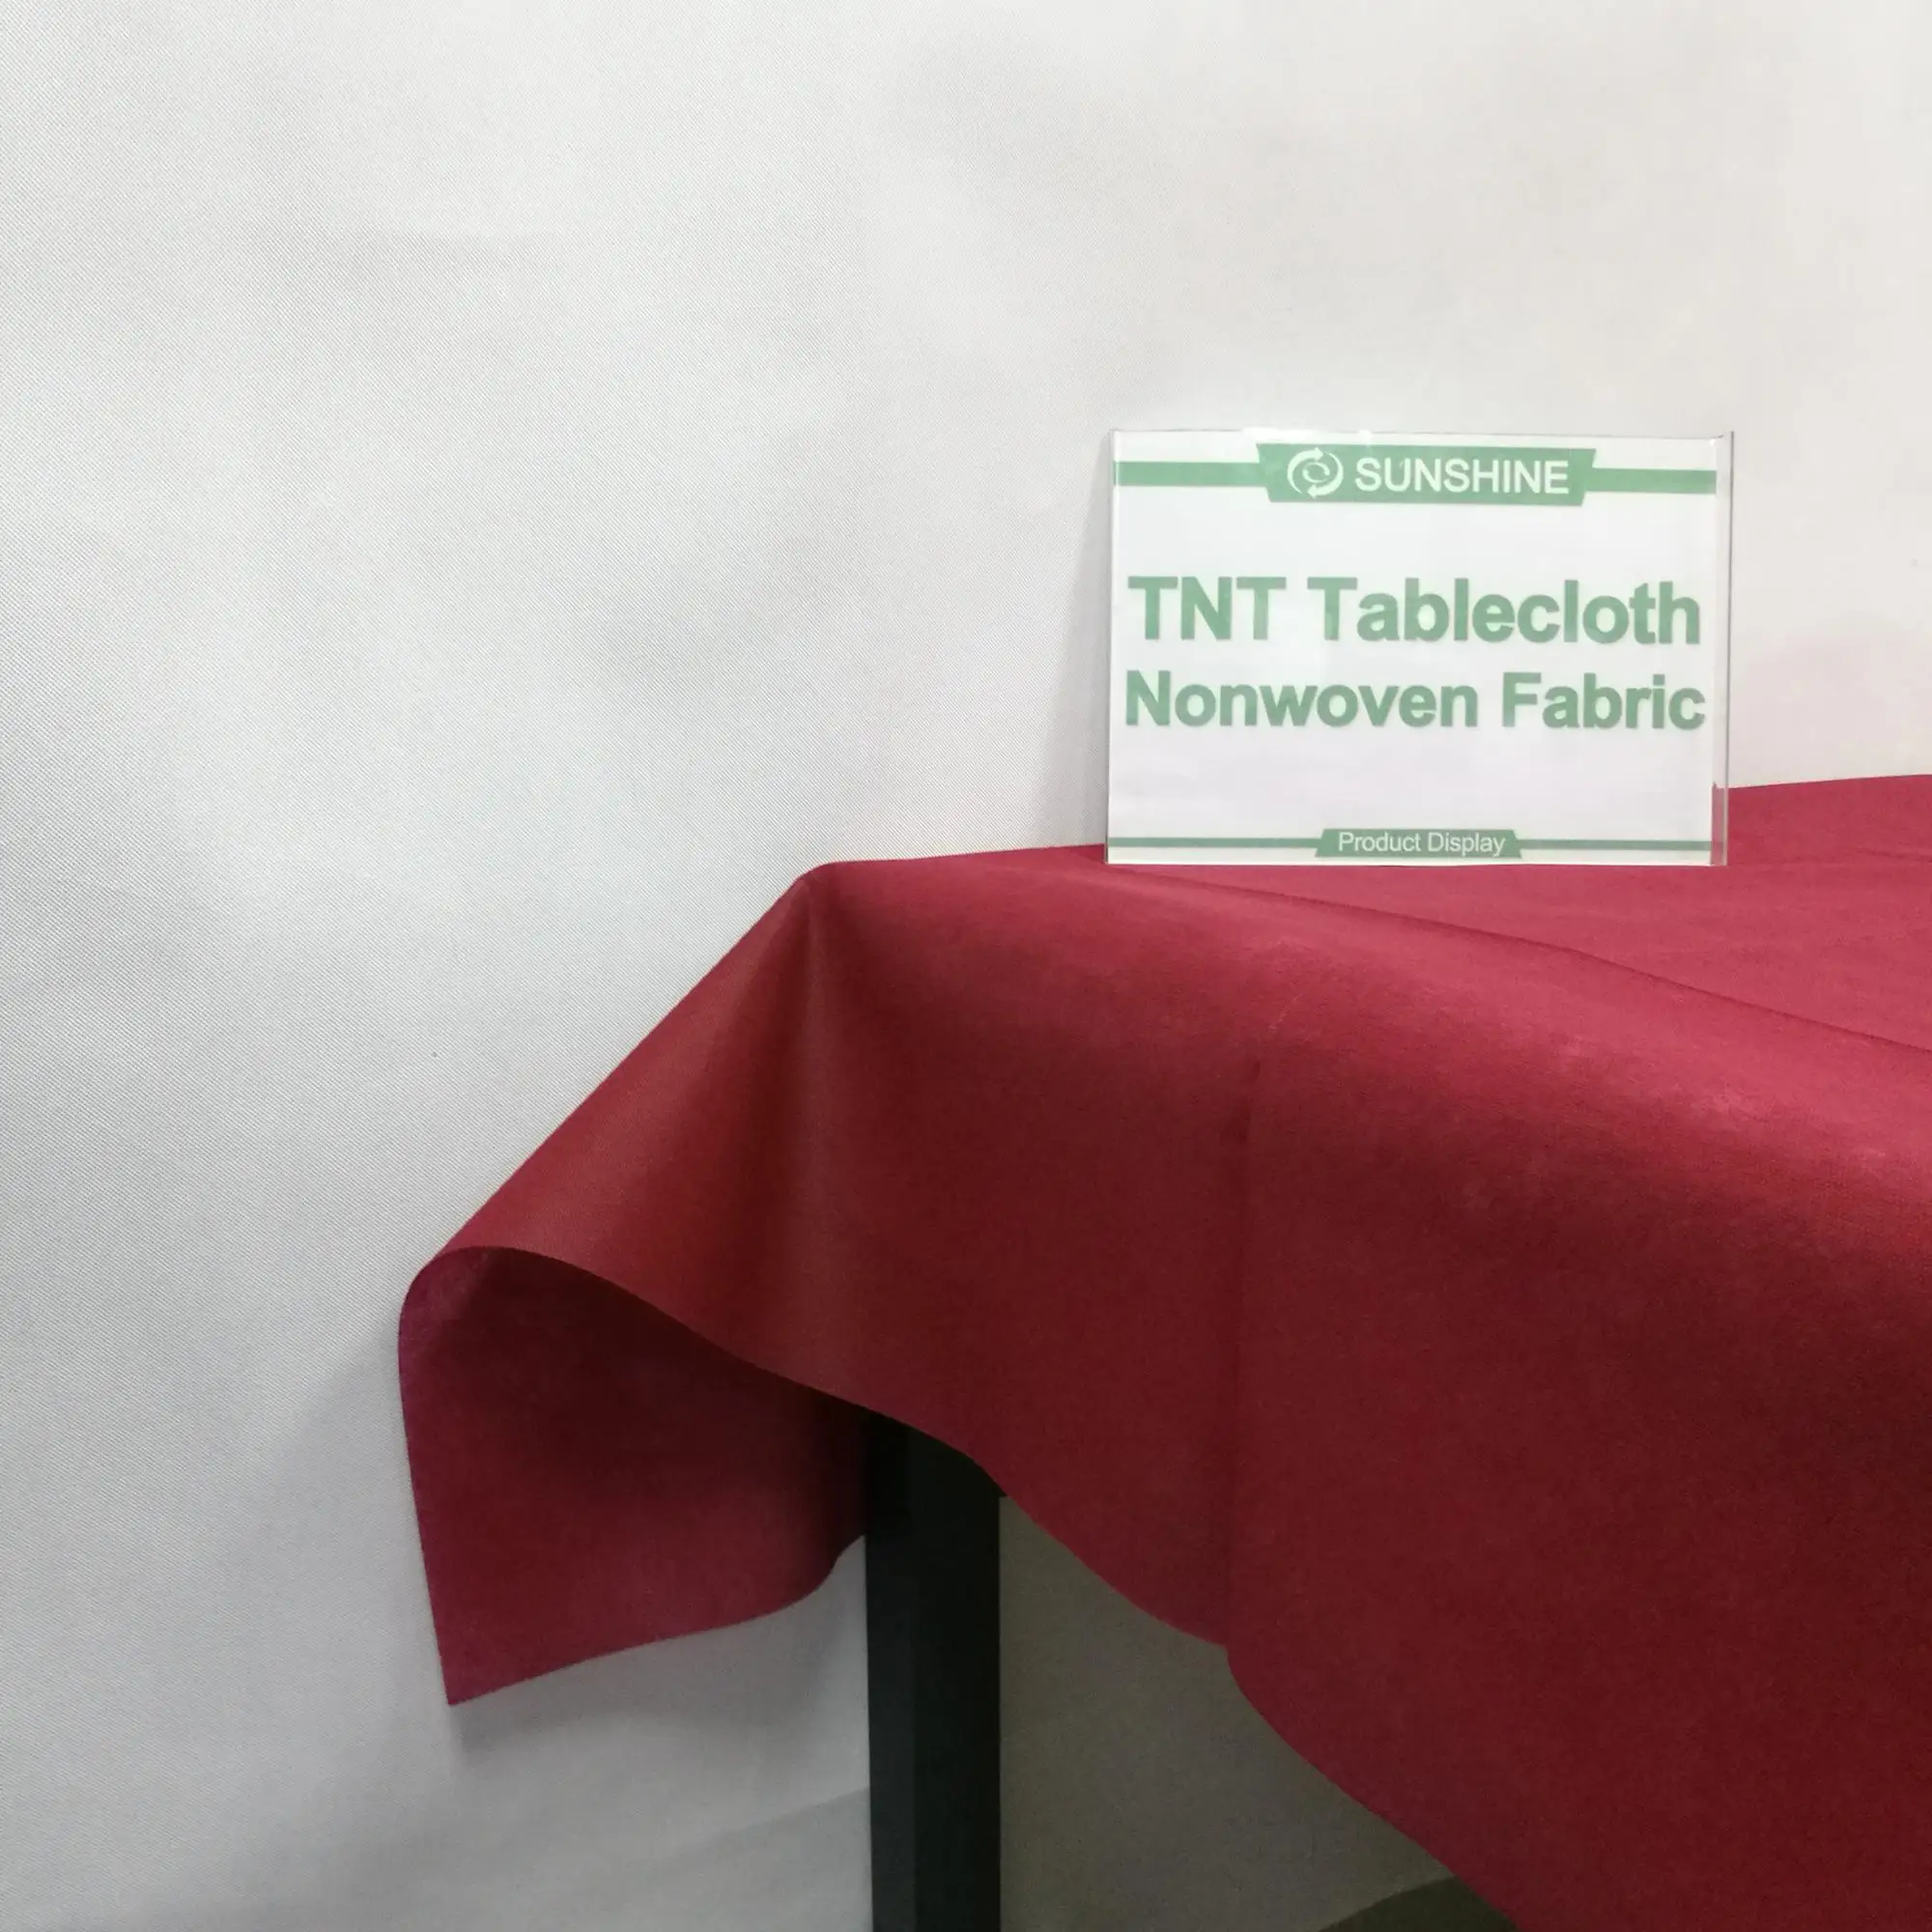 Beautiful PP spunbond nonwoven fabric for TNT table clothes